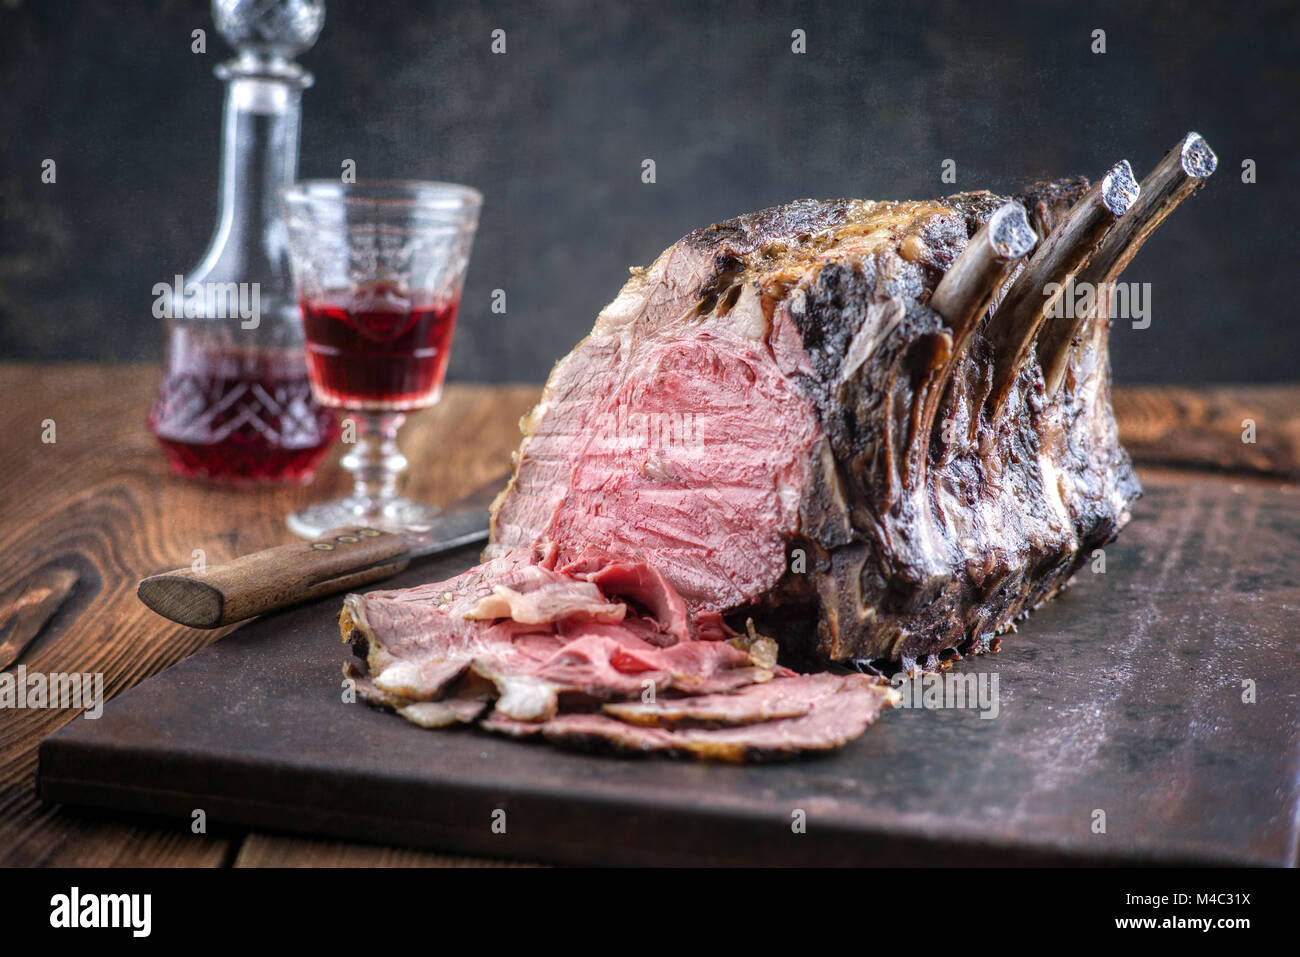 Rib of Beef Cold Cut on old Metal Sheet Stock Photo